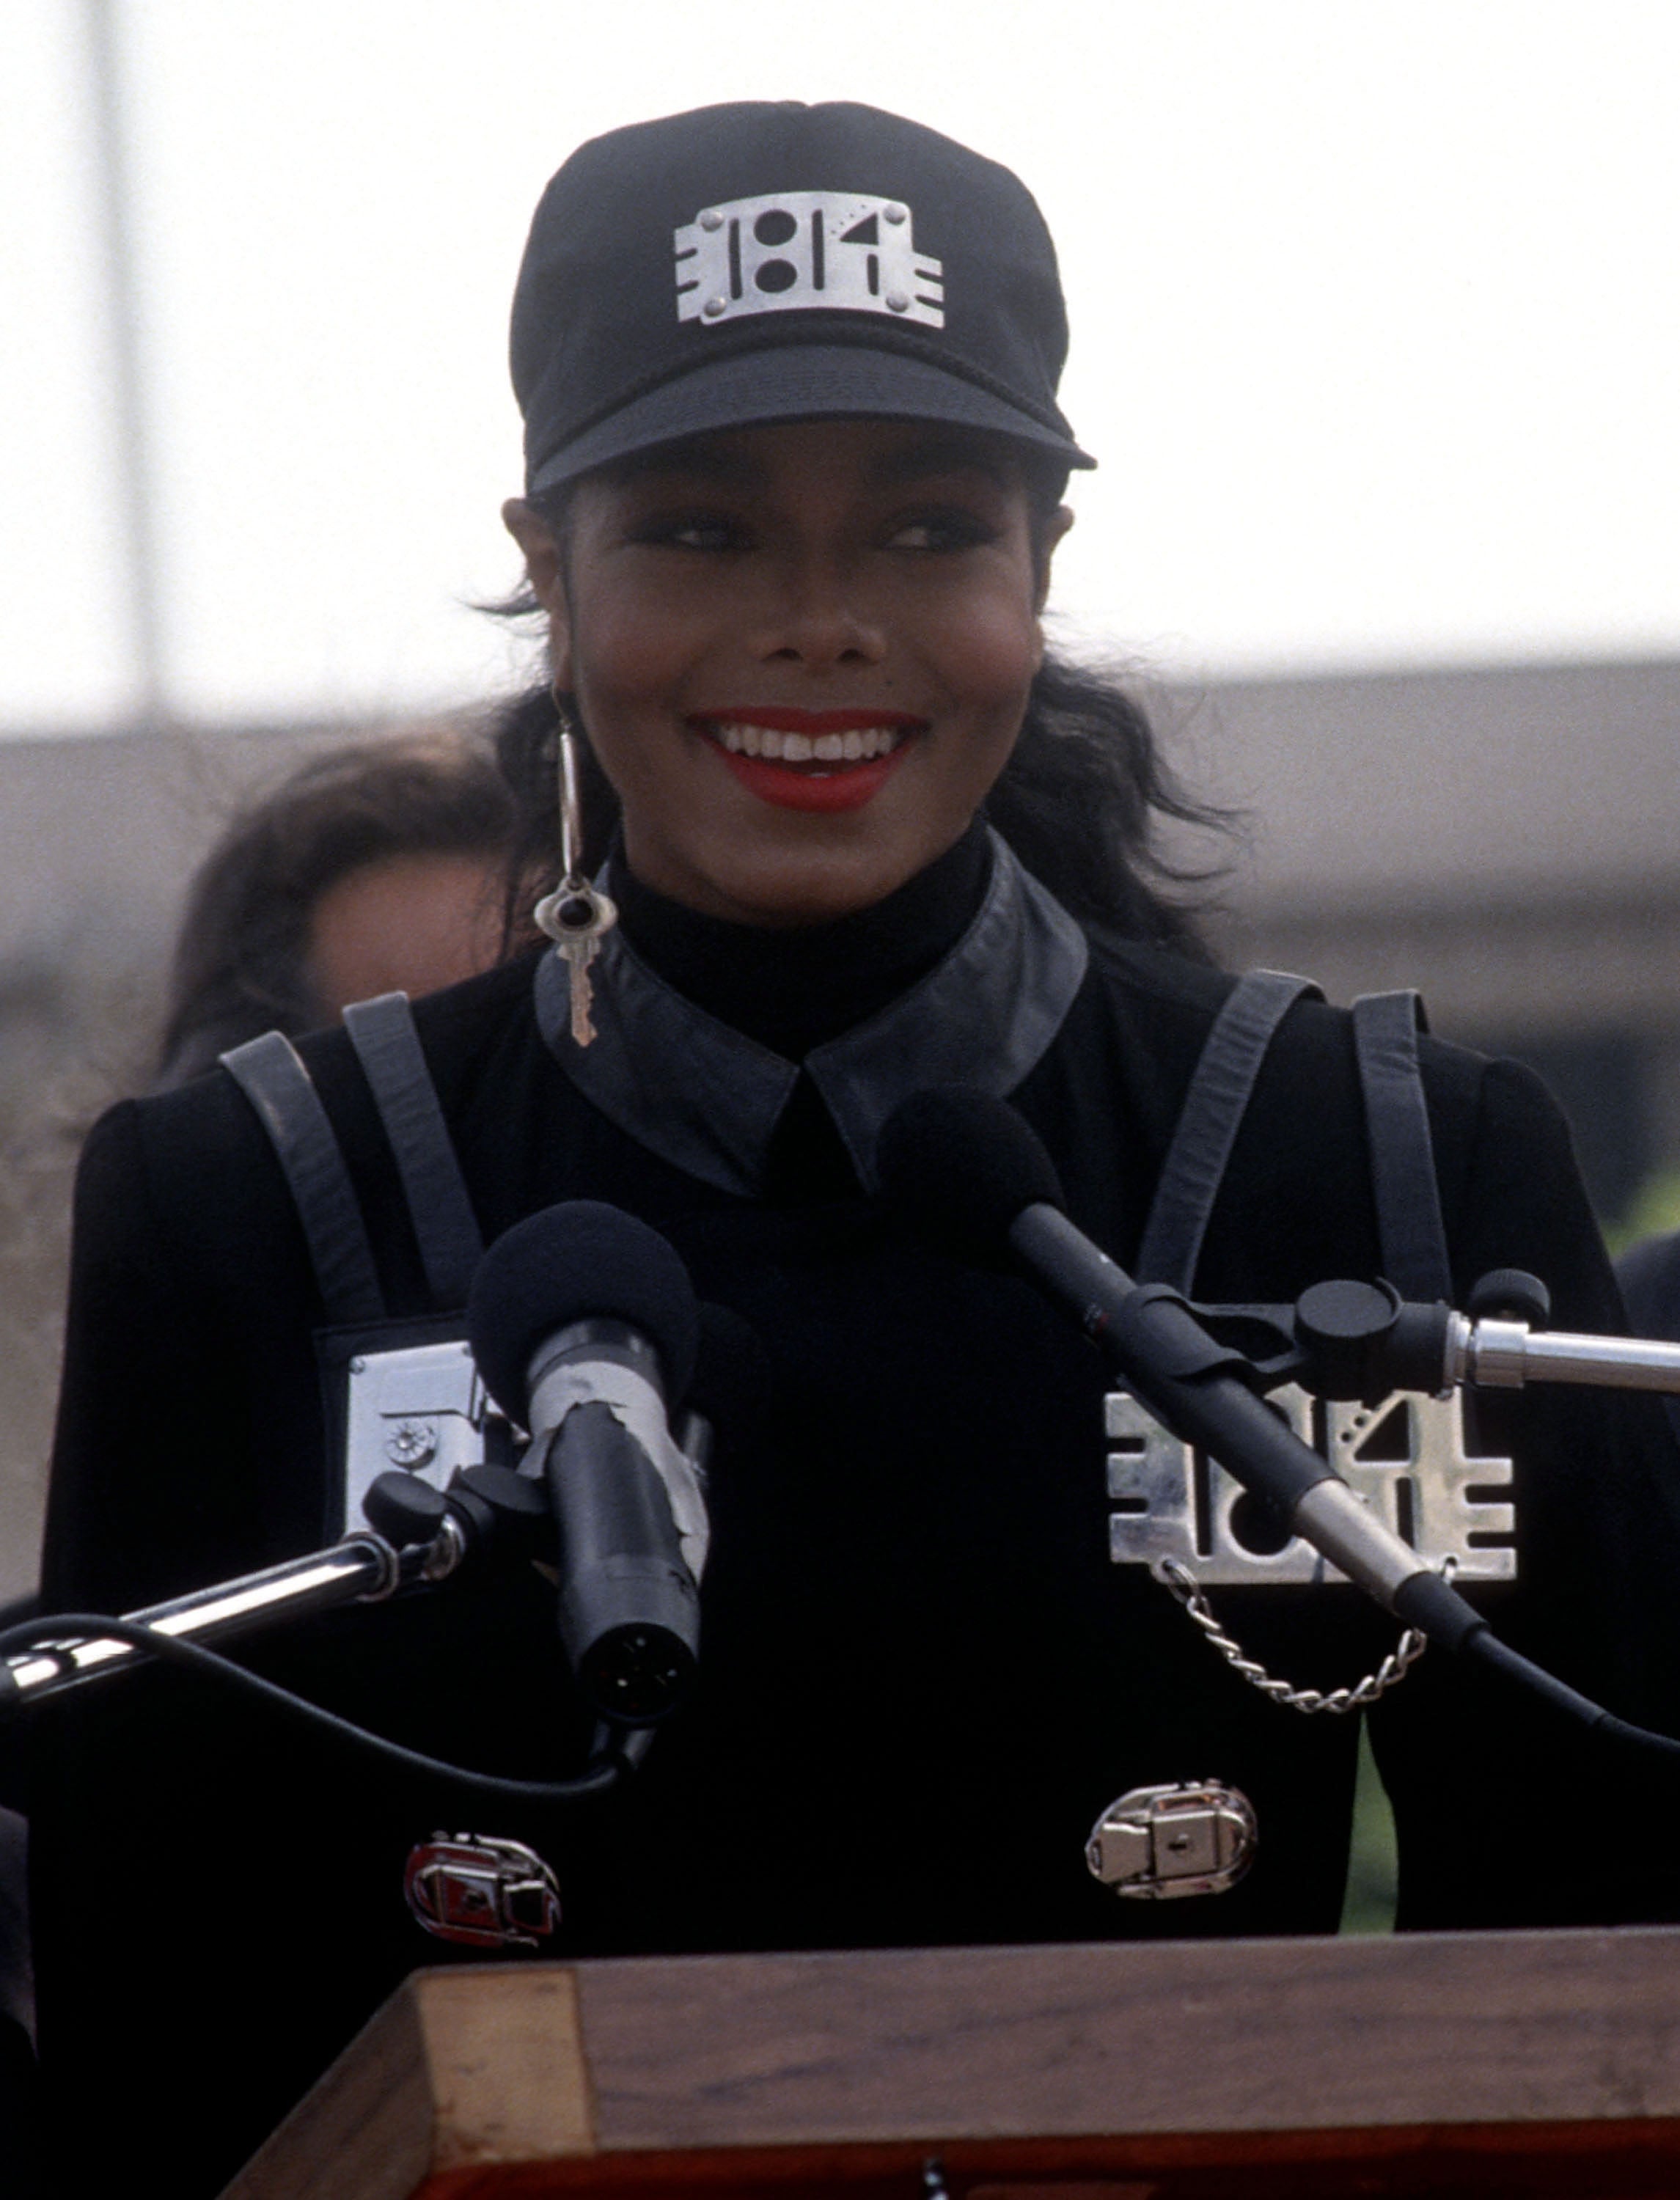 Channel The One And Only Janet Jackson's Style With These Fierce Picks